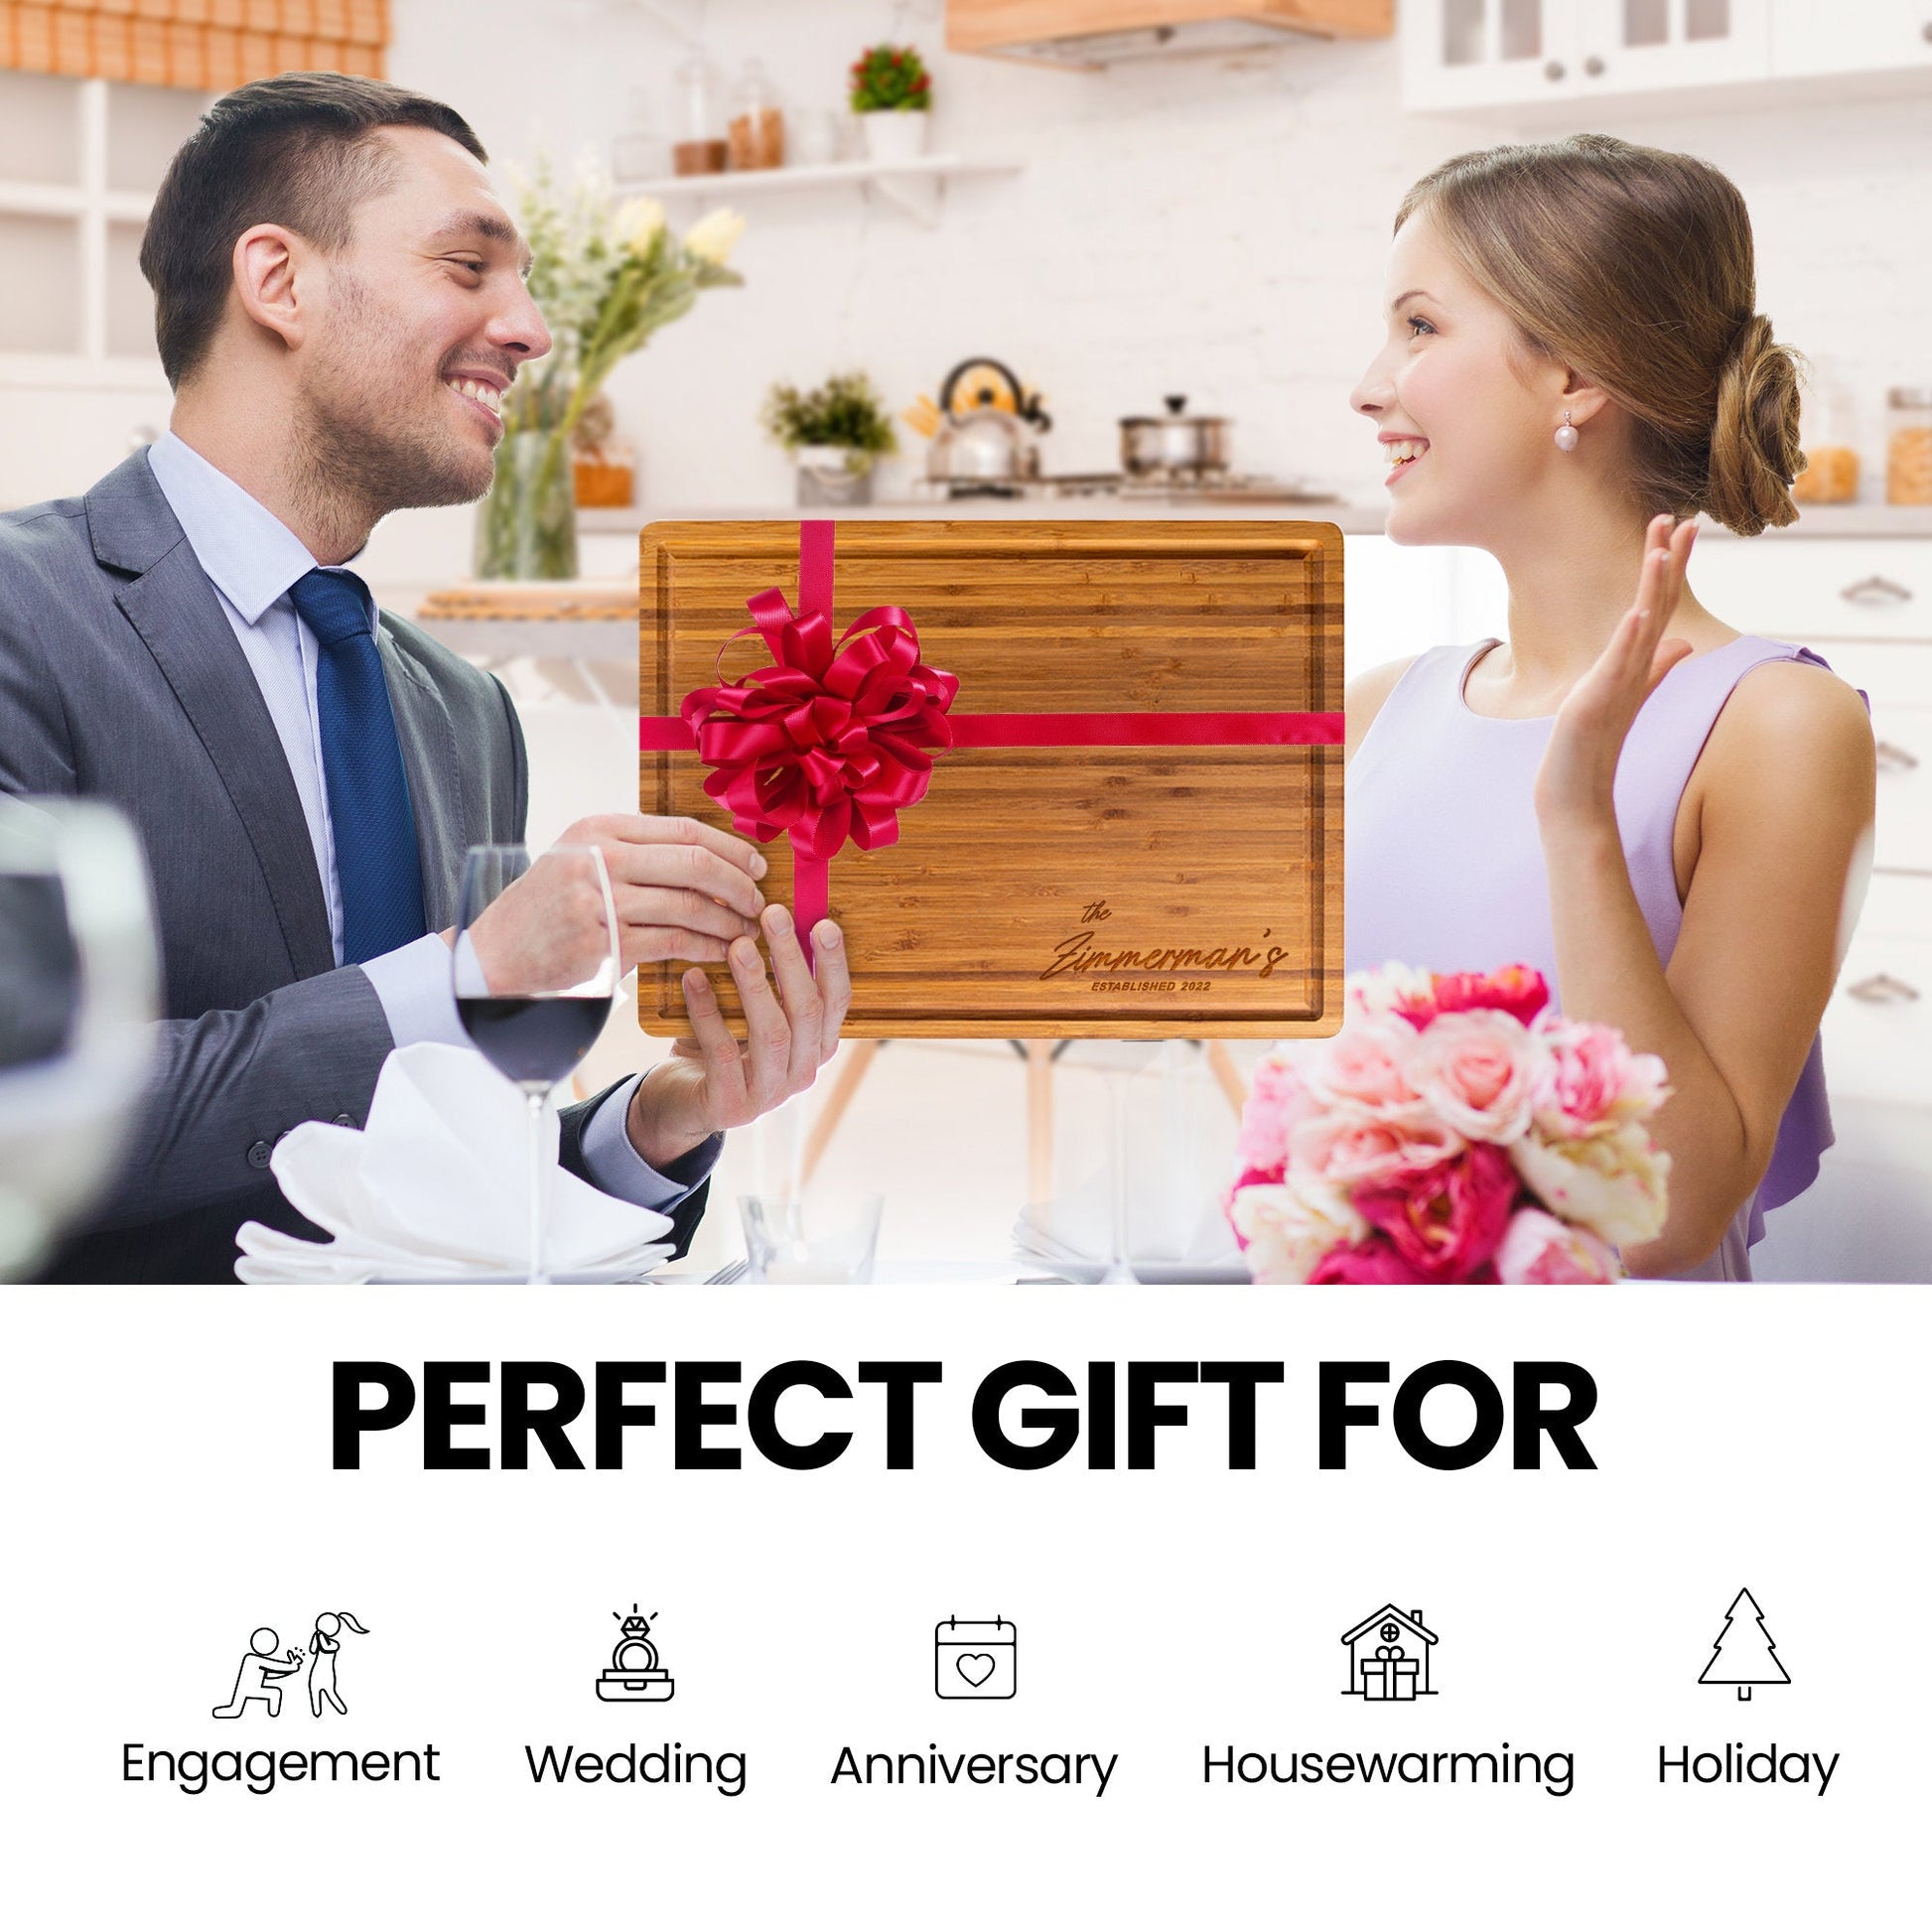 couple-exchanging-engraved-cutting-board-as-a-gift.